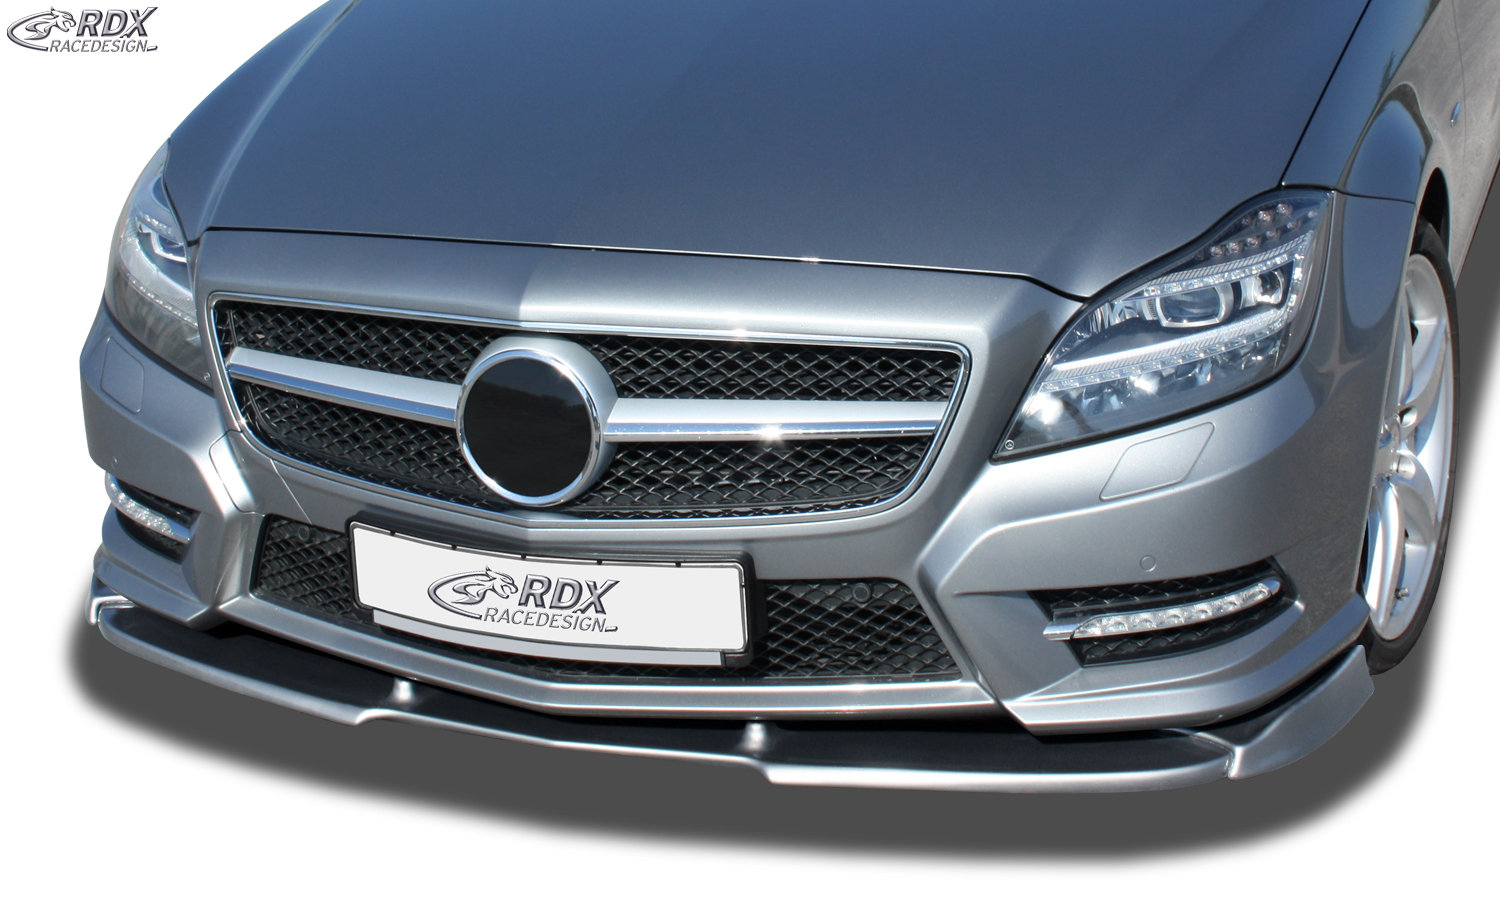 RDX Front Spoiler VARIO-X for MERCEDES CLS-class C218 -08/2014 for Cars with AMG-Styling Frontbumper) Front Lip Splitter